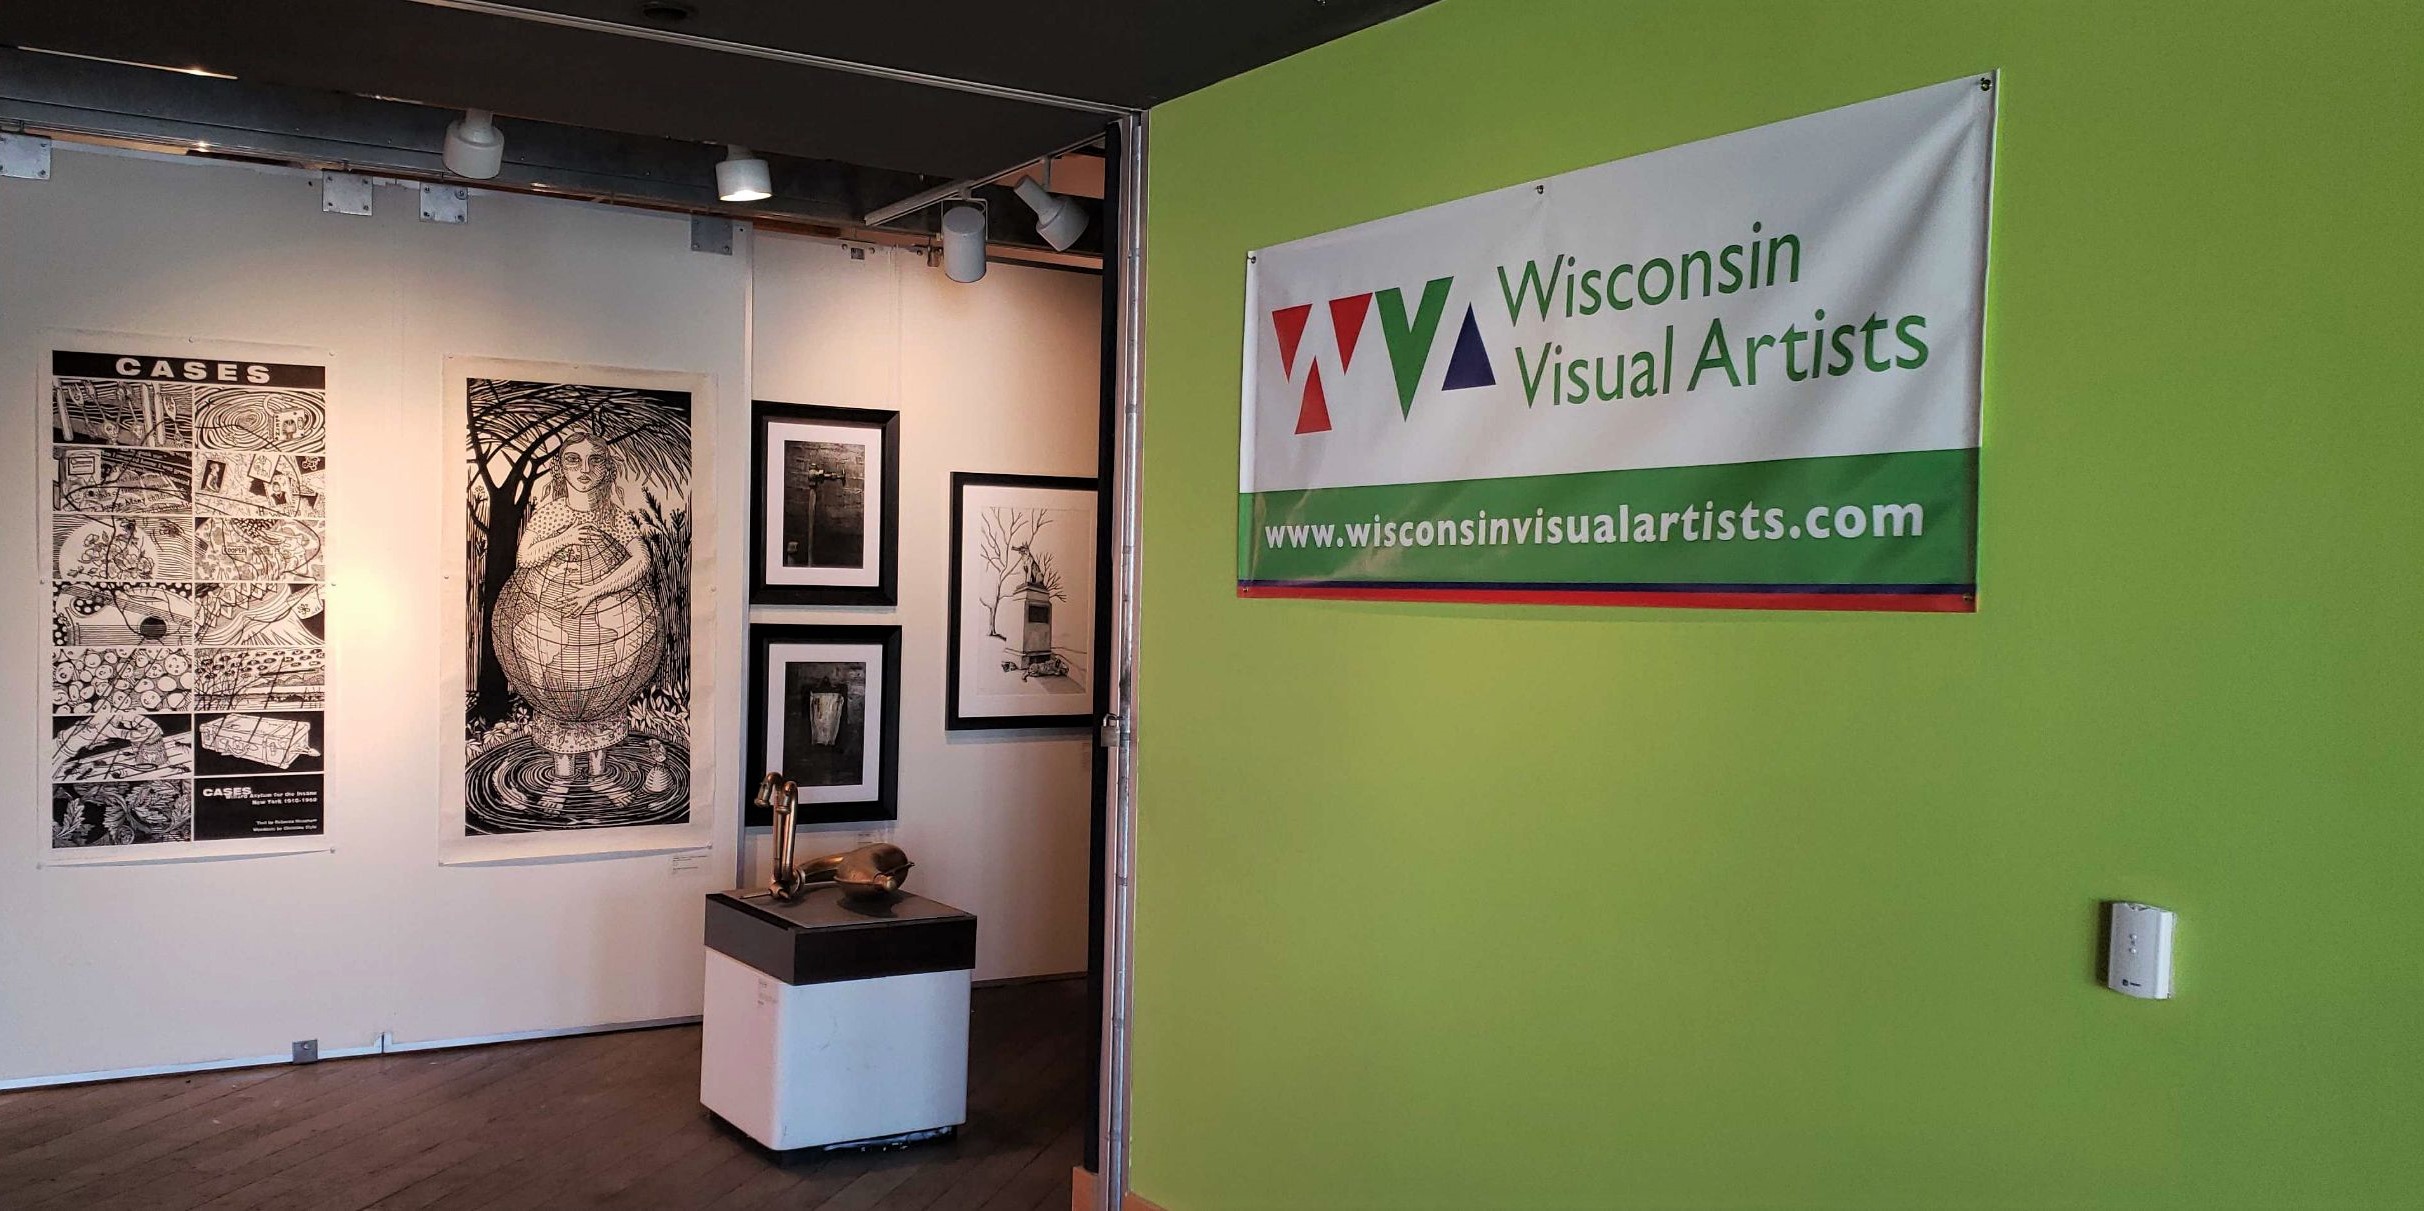 Founded in 1900, Wisconsin Visual Artists continues to provide exhibition opportunities for its members around the state today. 